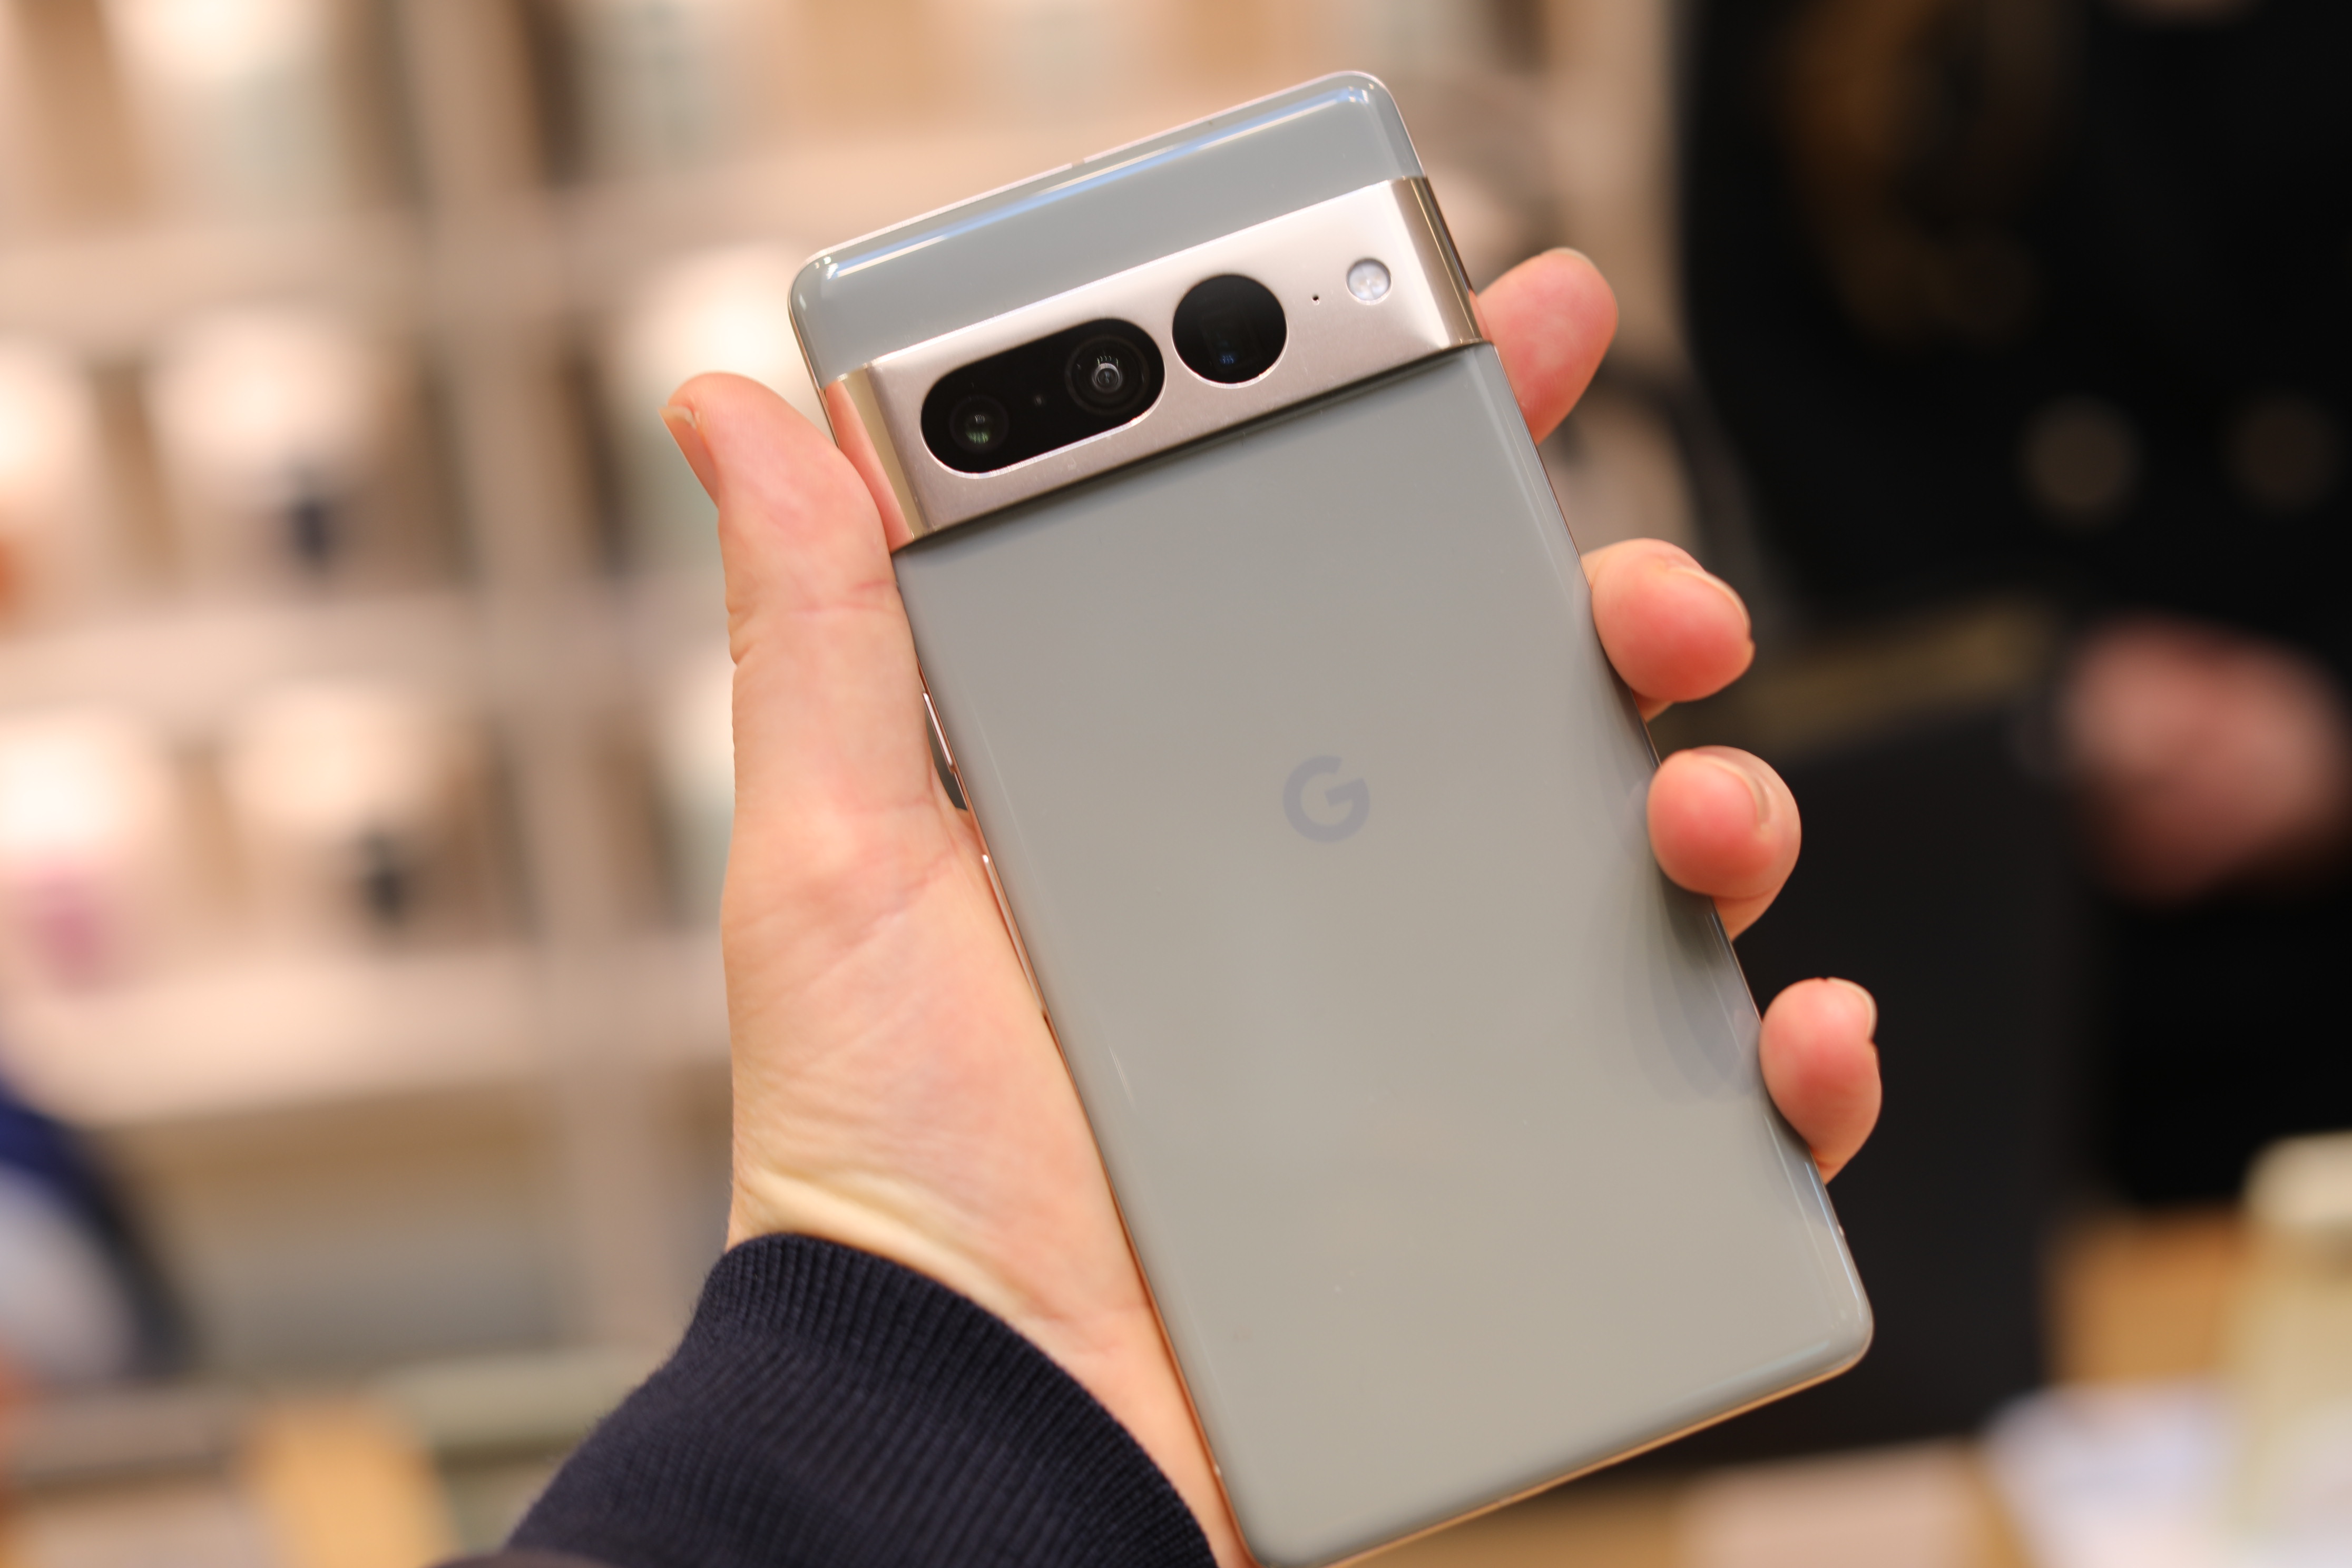 Google Pixel 7 up close: The software’s the thing